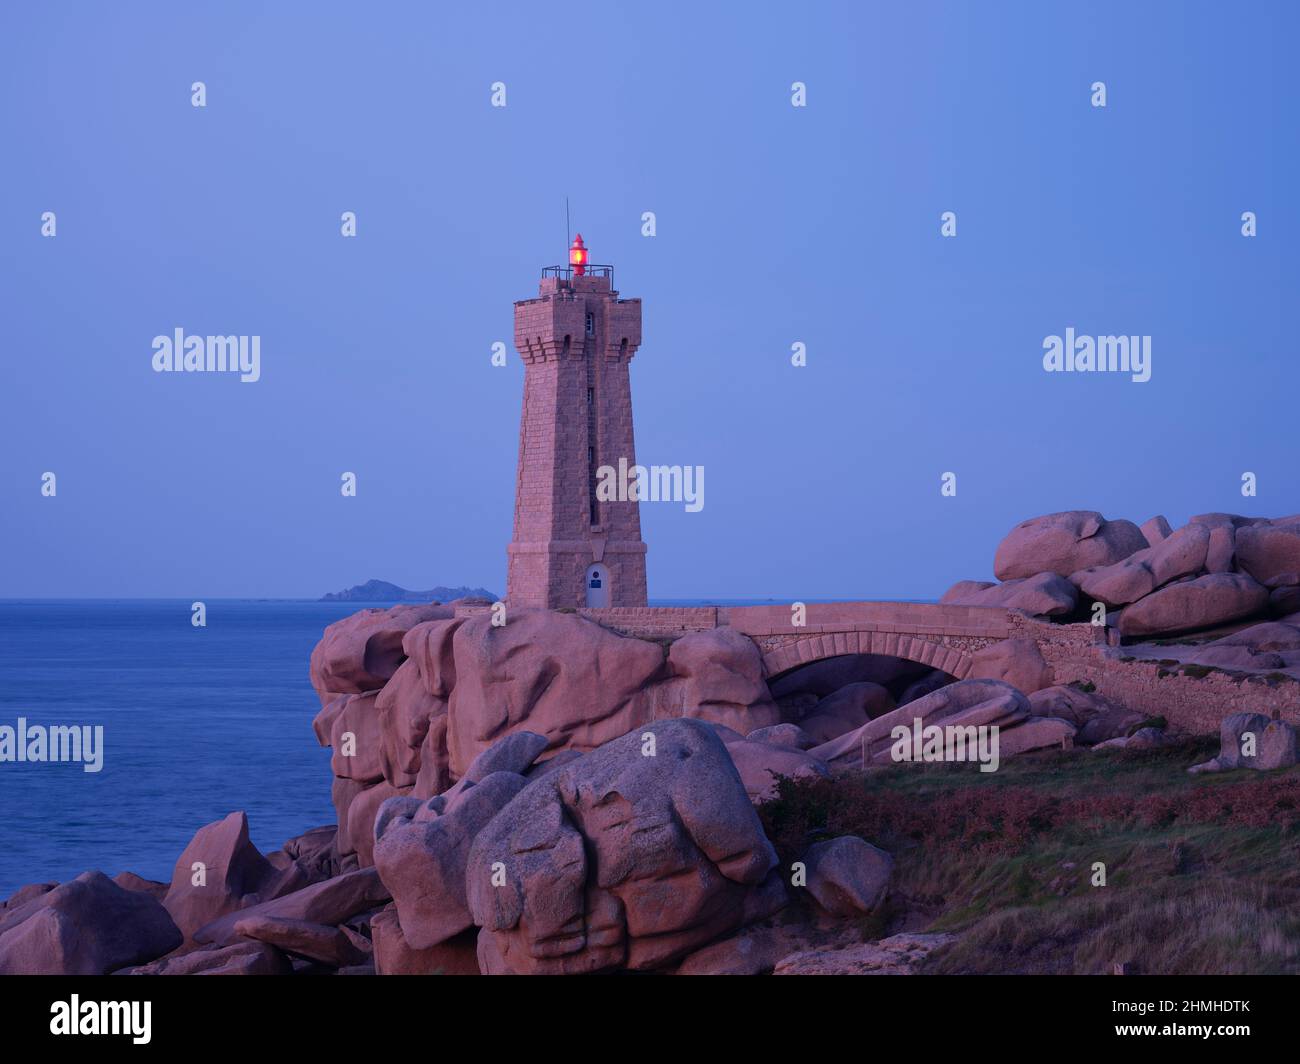 Phare de Ploumanac'h at dusk on the Côte de Granit Rose in the Côtes d'Armor department of Brittany. The lighthouse was built from the pink granite of the rocky coast and blends in harmoniously with the surroundings Stock Photo